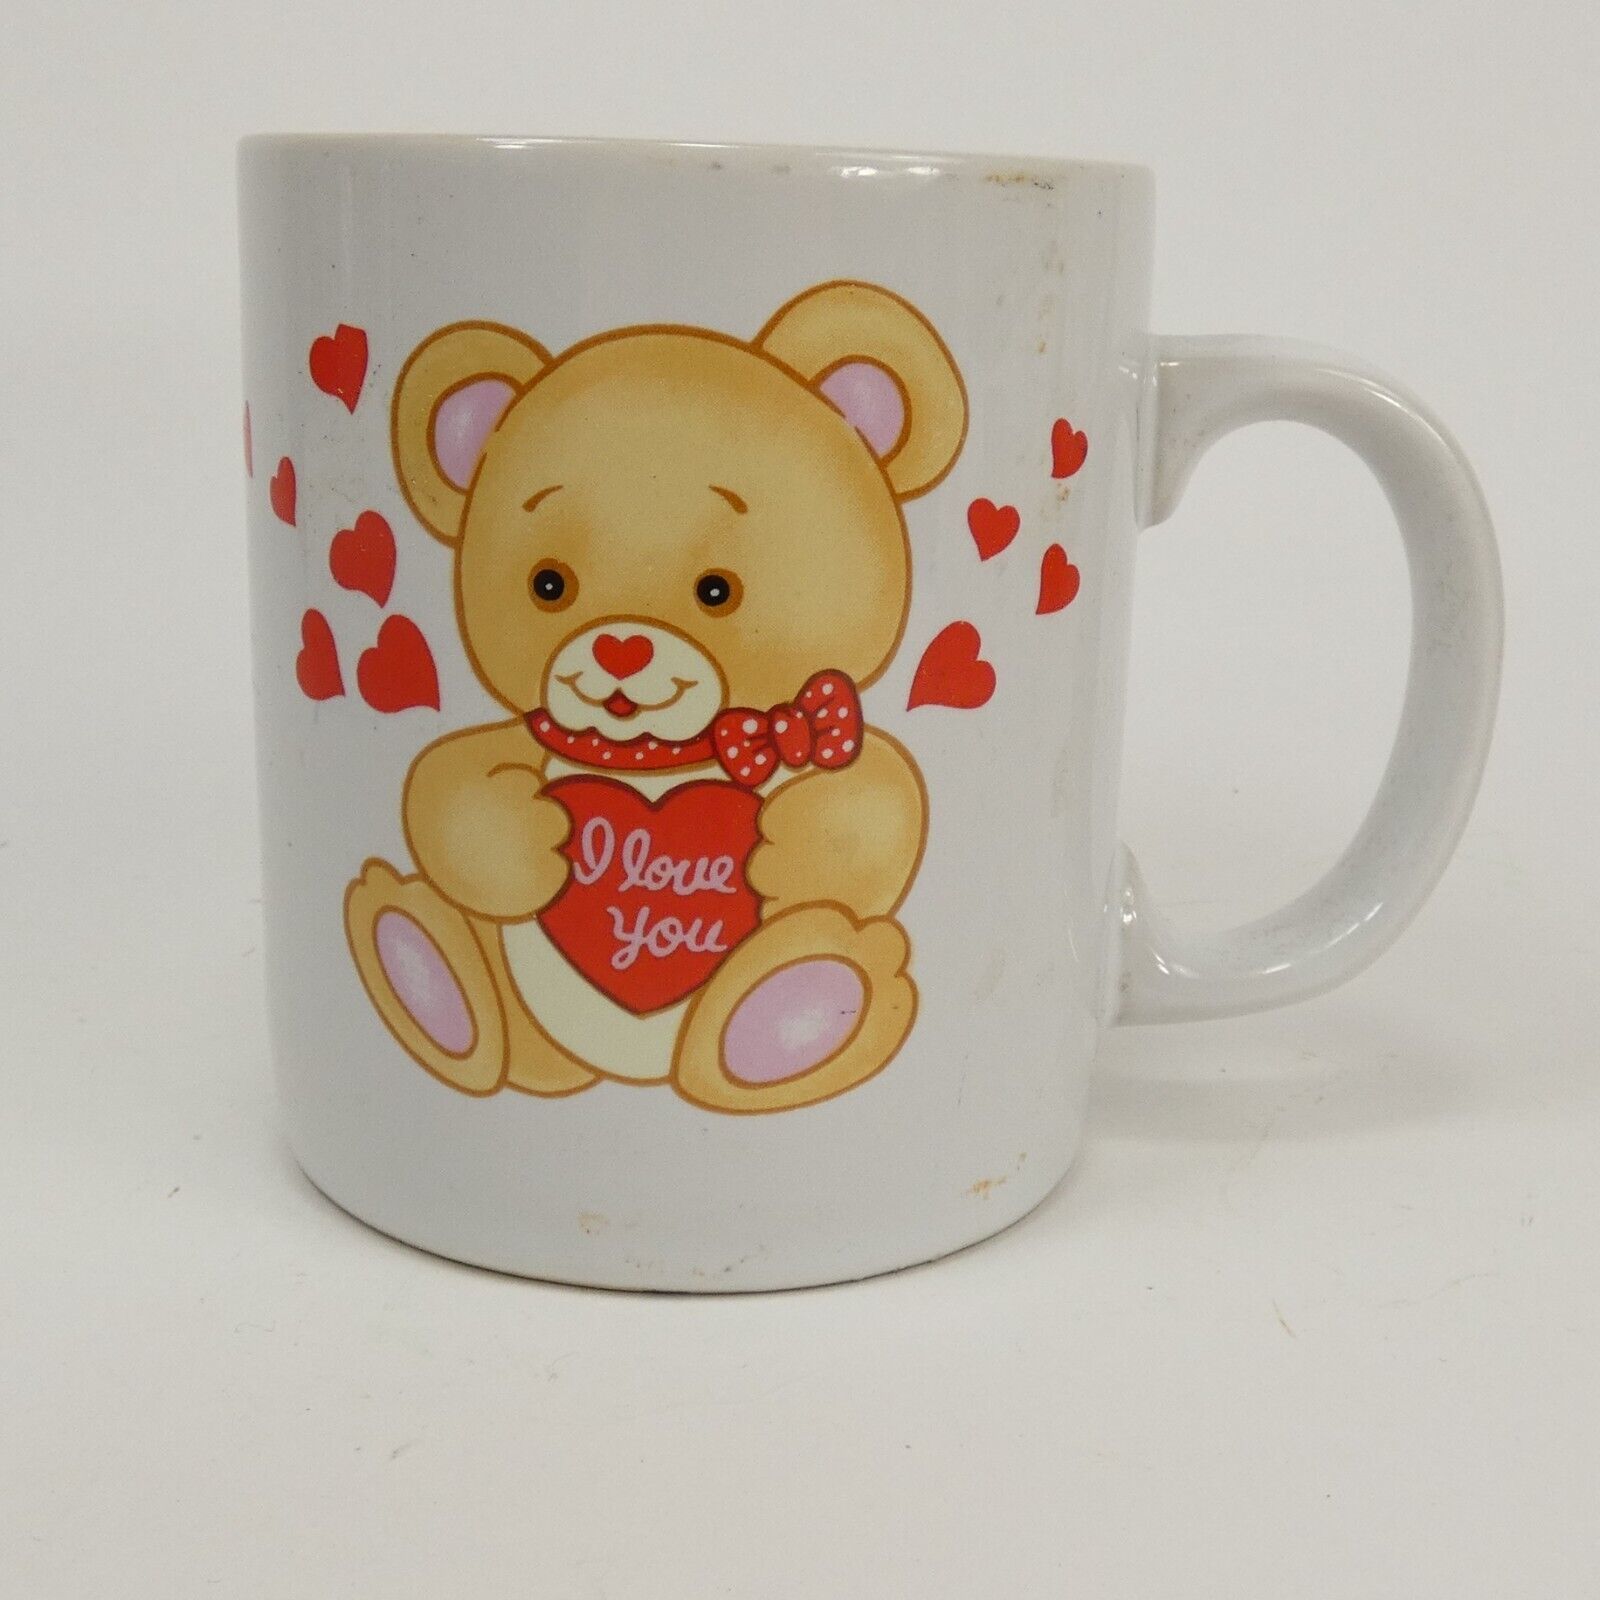 "I Love You" Coffee Cup -  Cute Bear With Bow Tie and Red Hearts Enesco -  UOKFF - $5.00